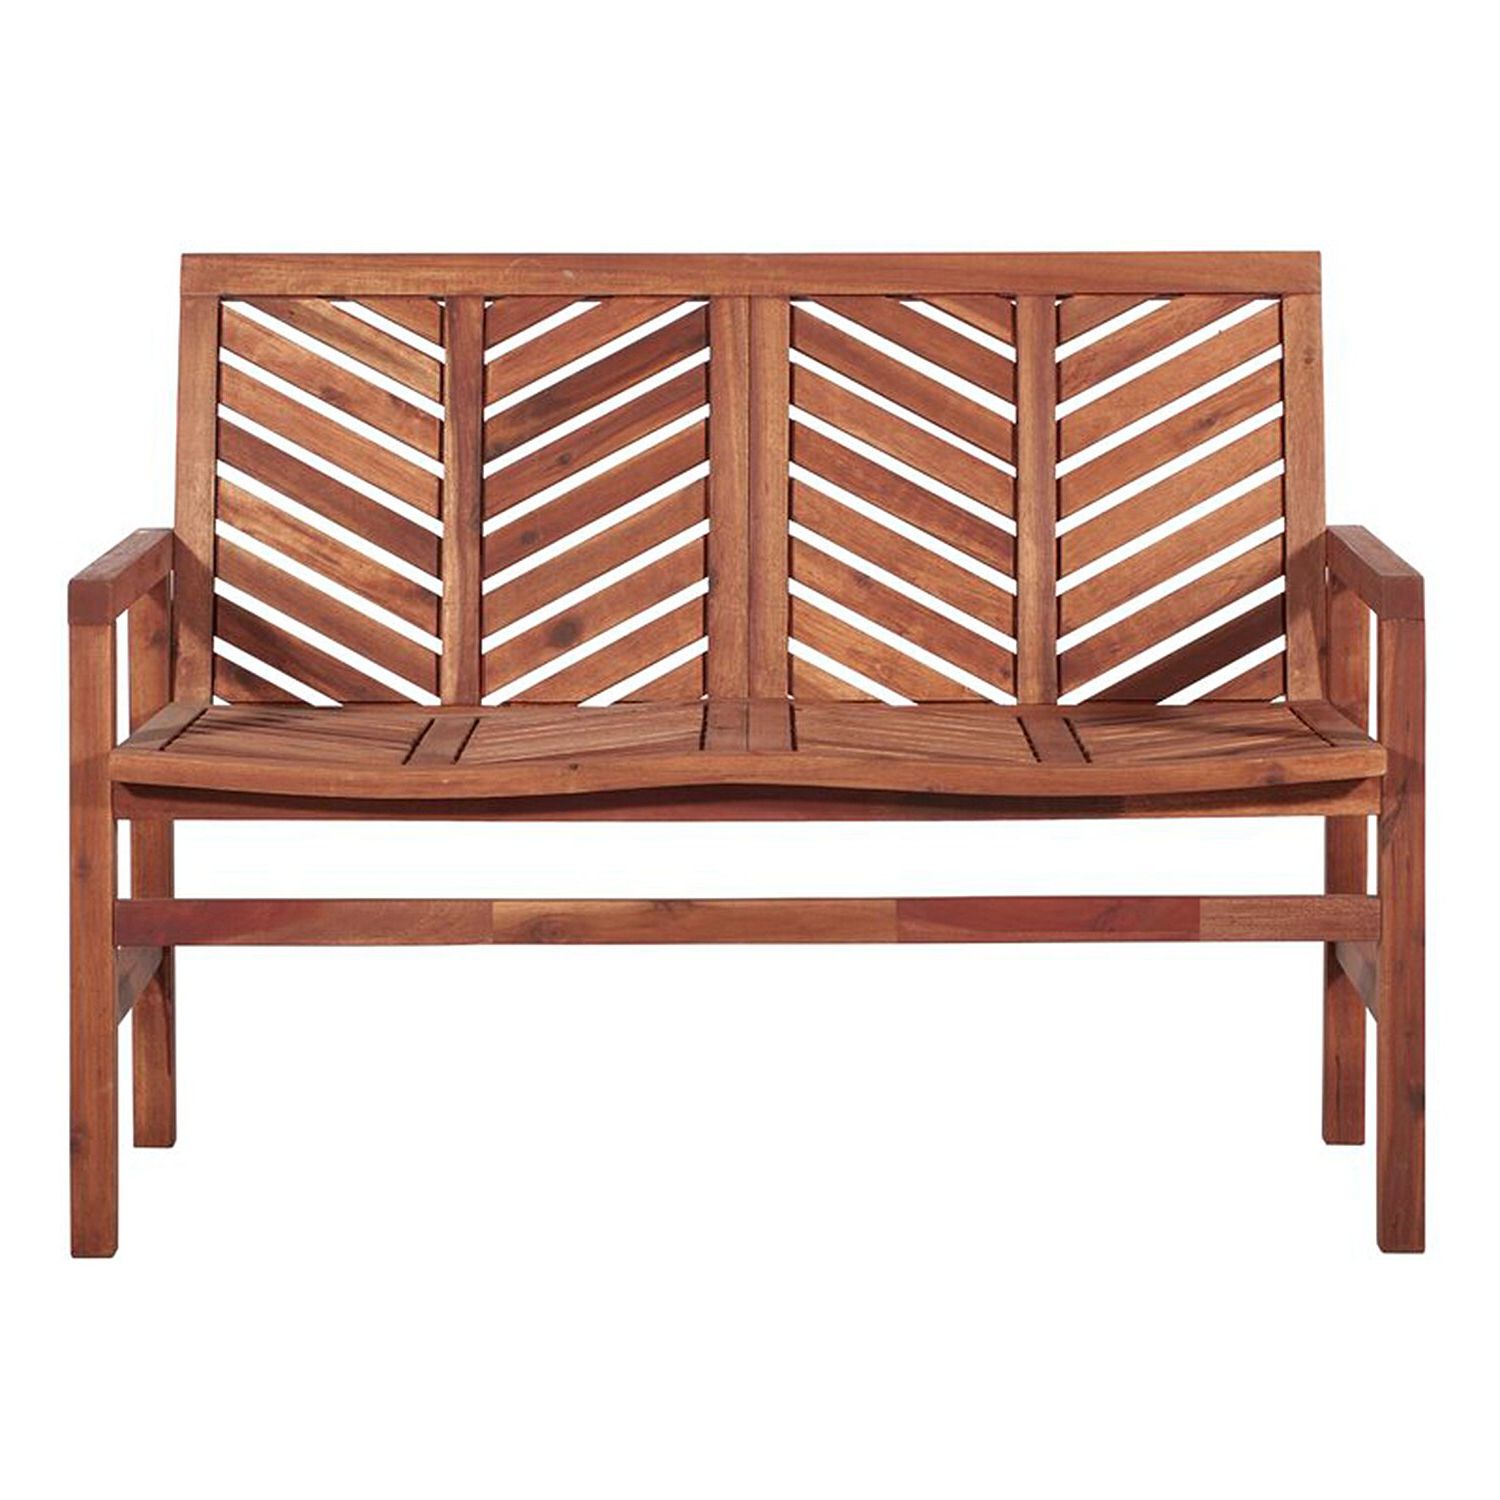 Skoog Chevron Wooden Storage Benches Intended For Most Up To Date The 10 Best Deals From Wayfair's Outdoor Furniture Sale (View 8 of 30)